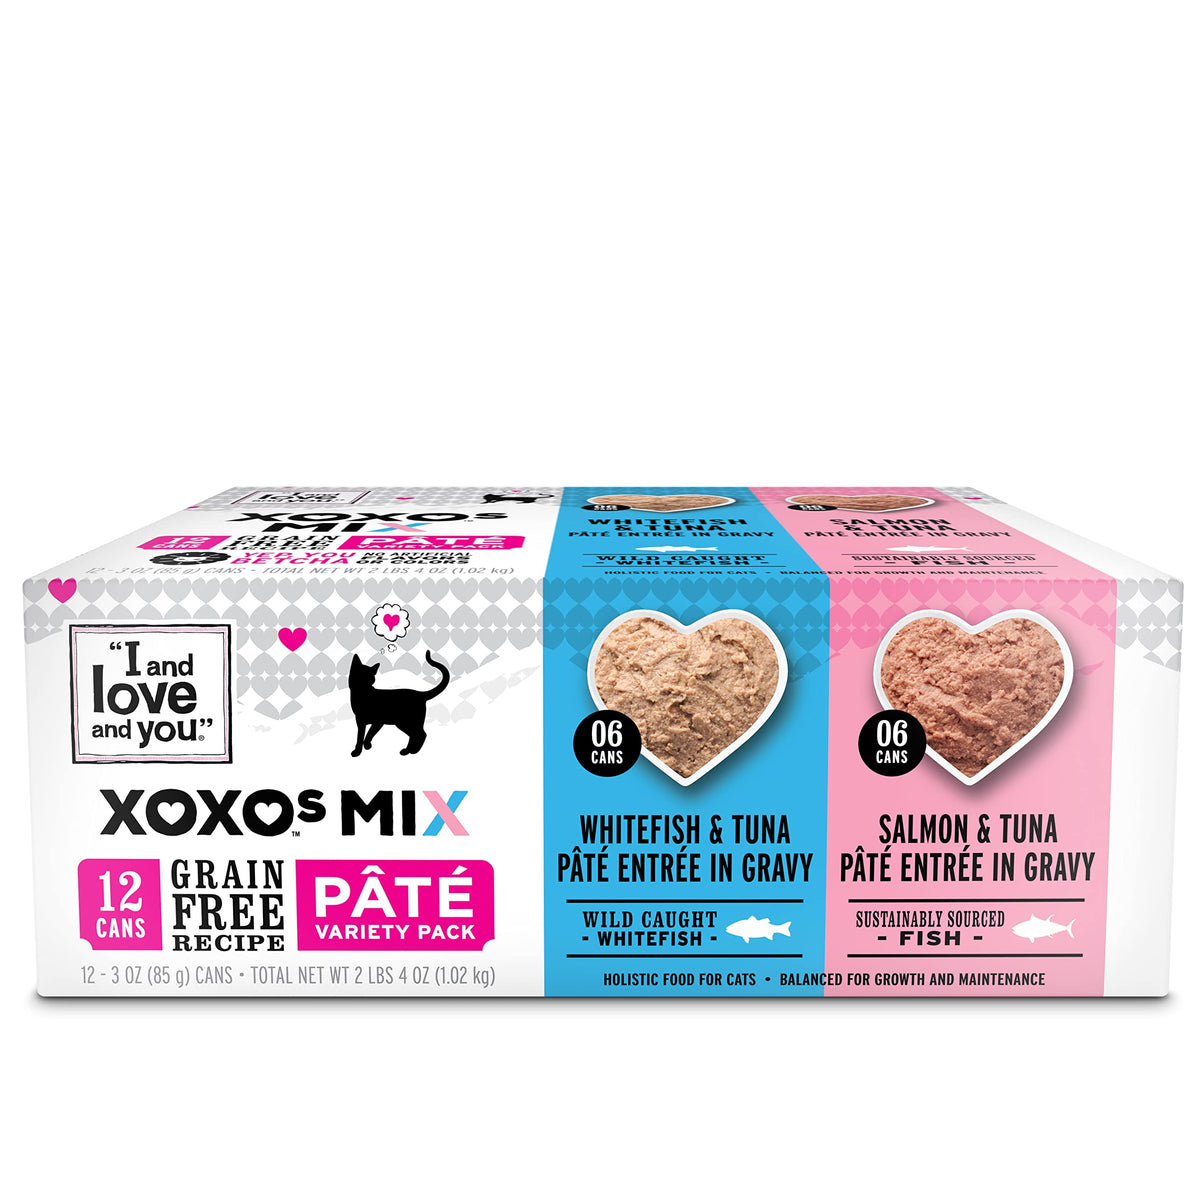 I AND LOVE AND YOU" XOXOs Canned Wet Cat Food, Whitefish and Tuna/Salmon and Tuna Pate, Grain Free, Real Meat, No Fillers, 3 oz Cans, Pack of 12 Cans